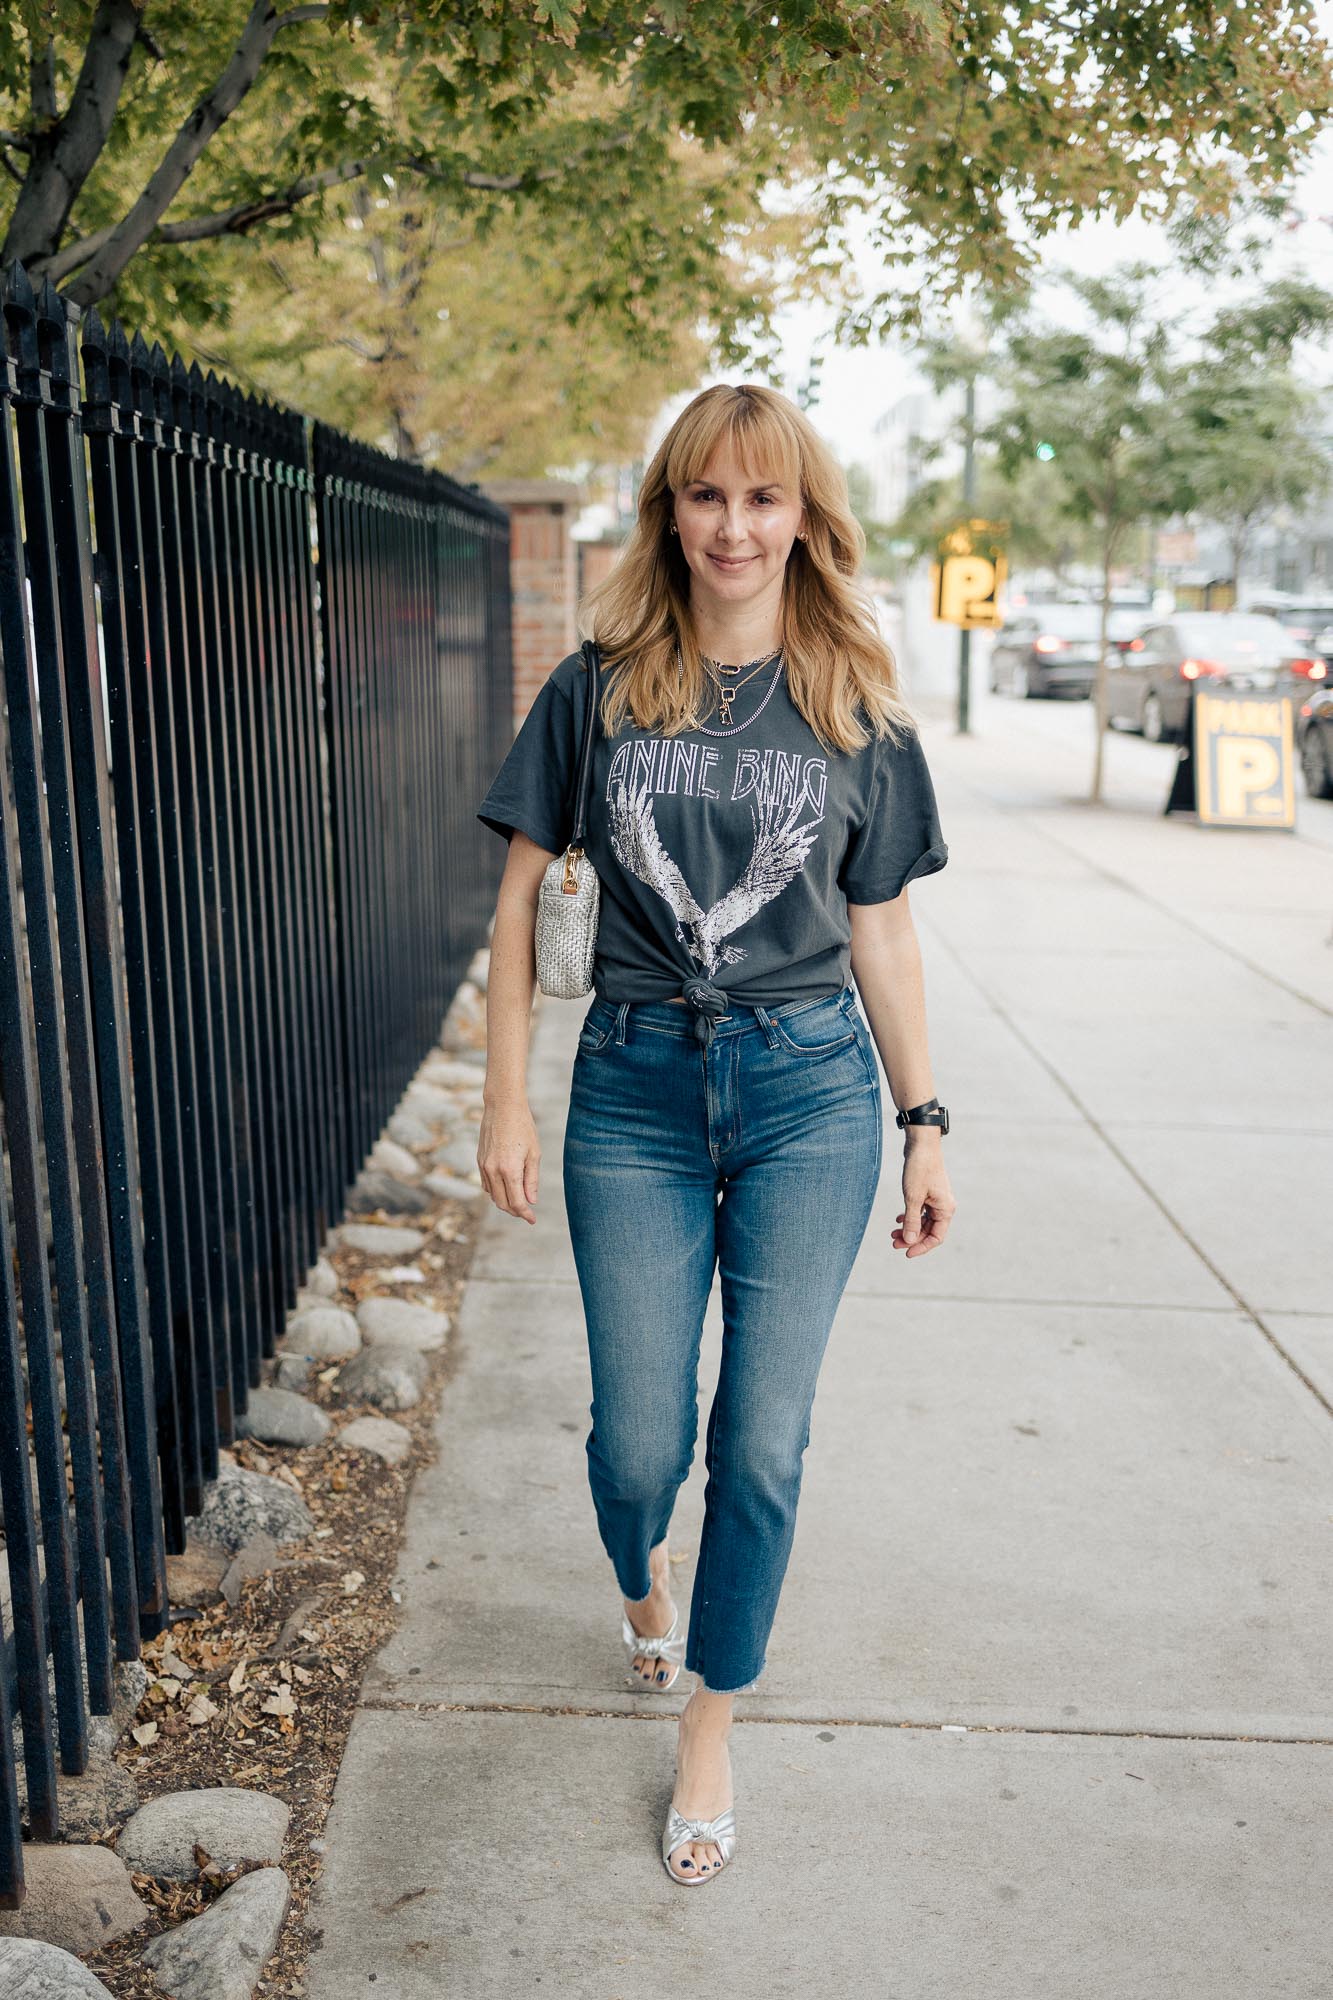 Wearing the Anine Bing washed black eagle graphic tee with Mother jeans and silver pumps.